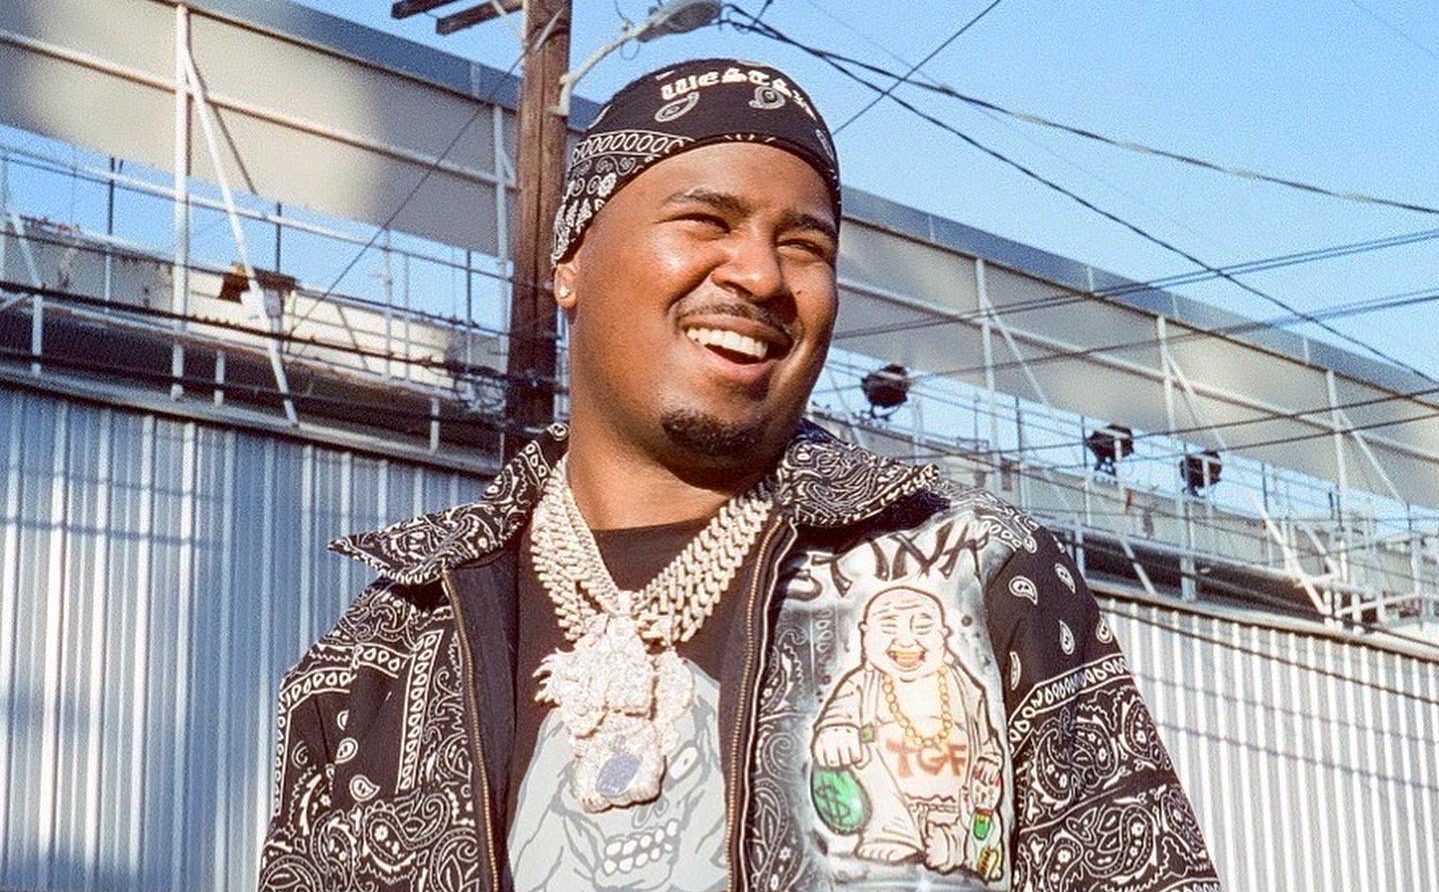 ON INSTAGRAM LIVE, DRAKEO THE RULER WAS ARRESTED AFTER HIS UBER DRIVER STOPPED FOR TINTED WINDOWS